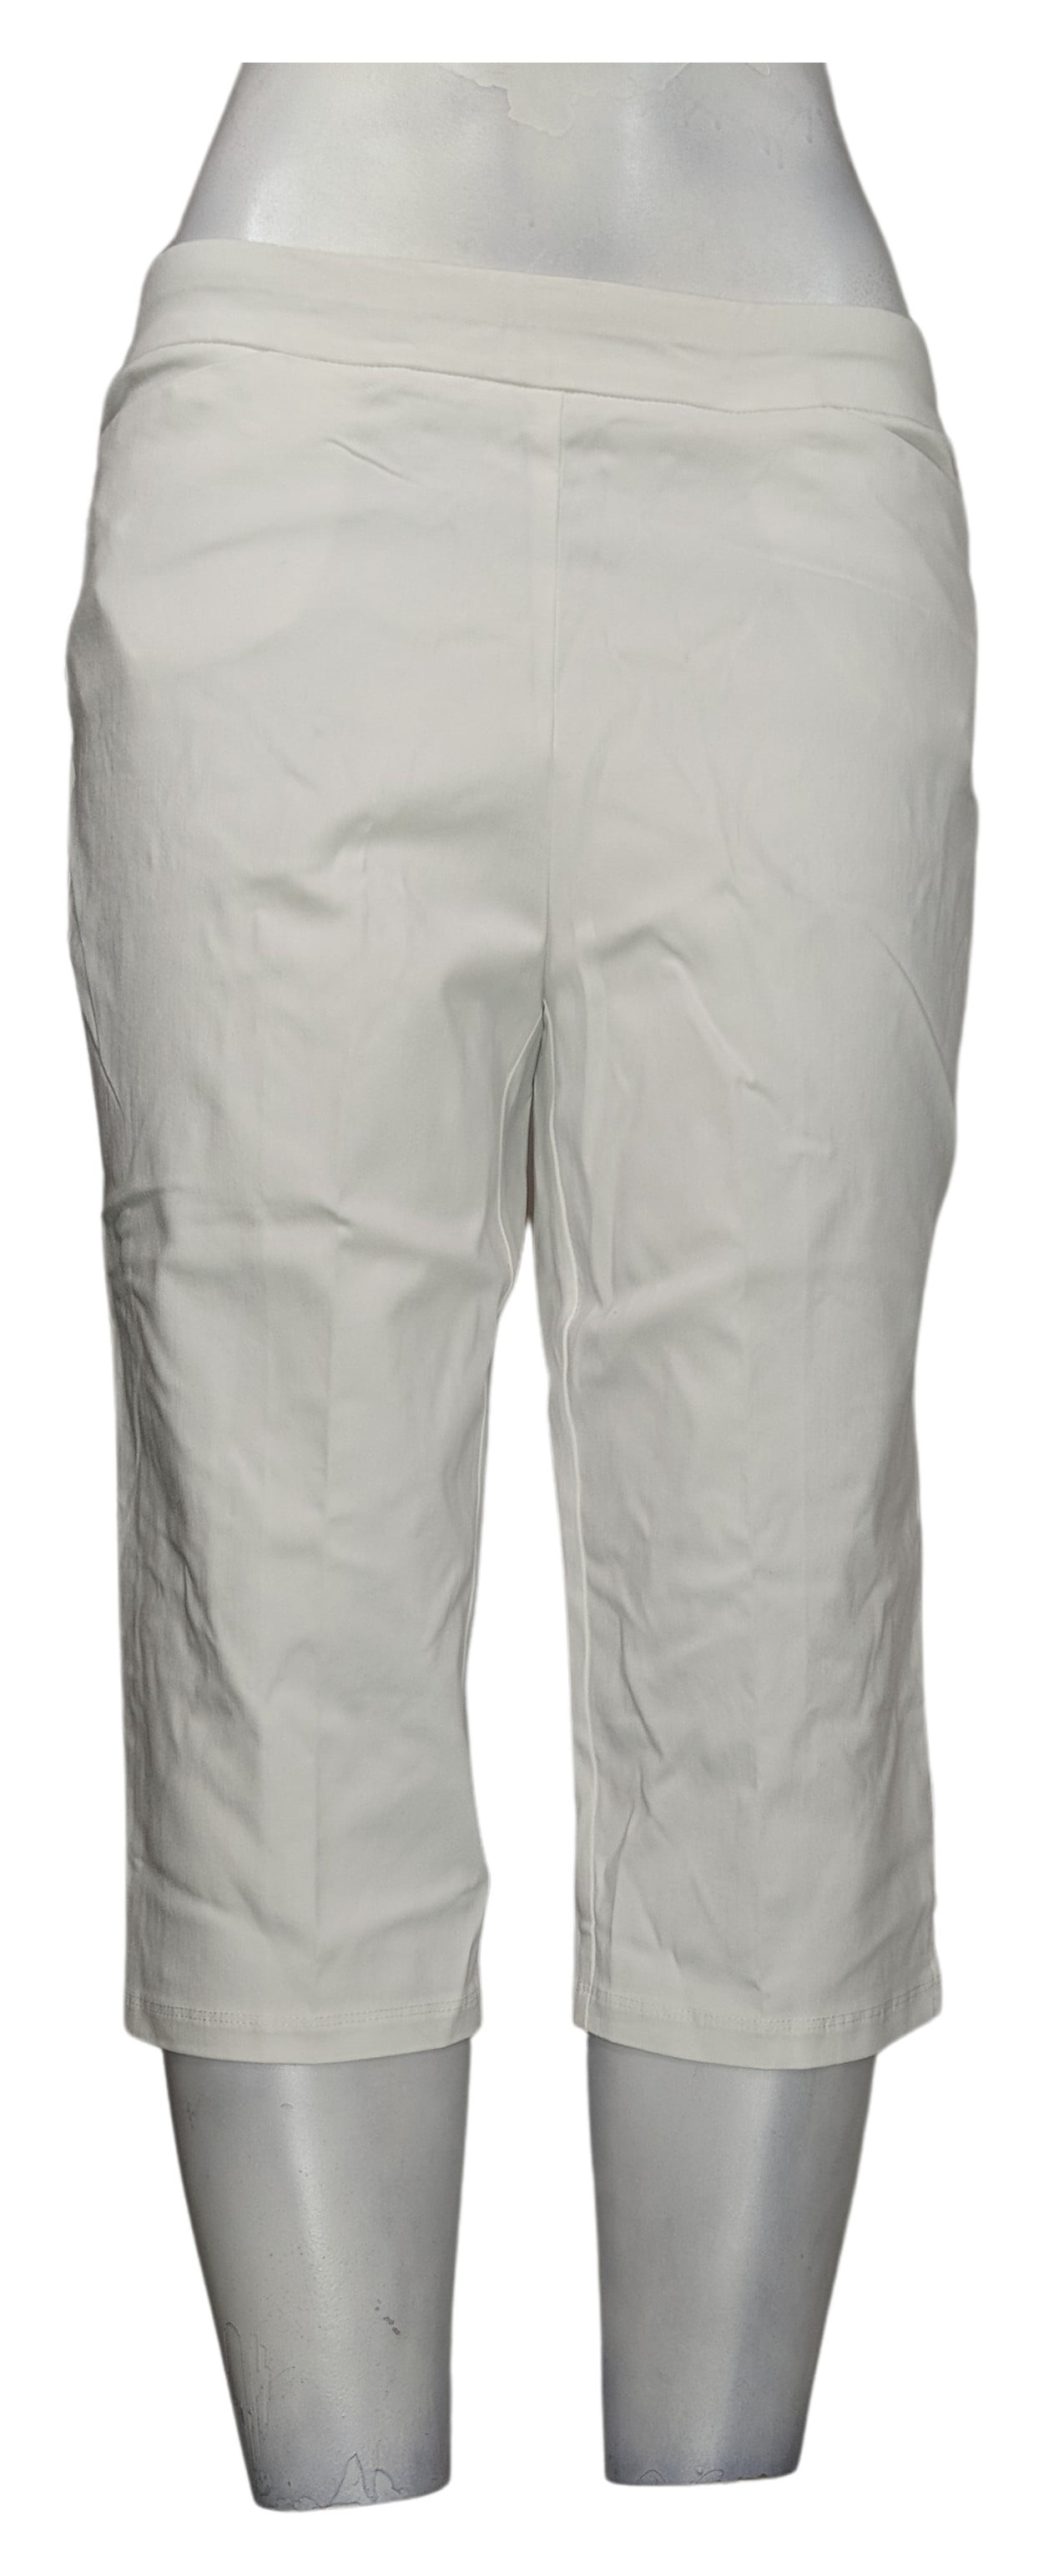 NEW casual pedal pushers bullit zip day white 6-18 1236 